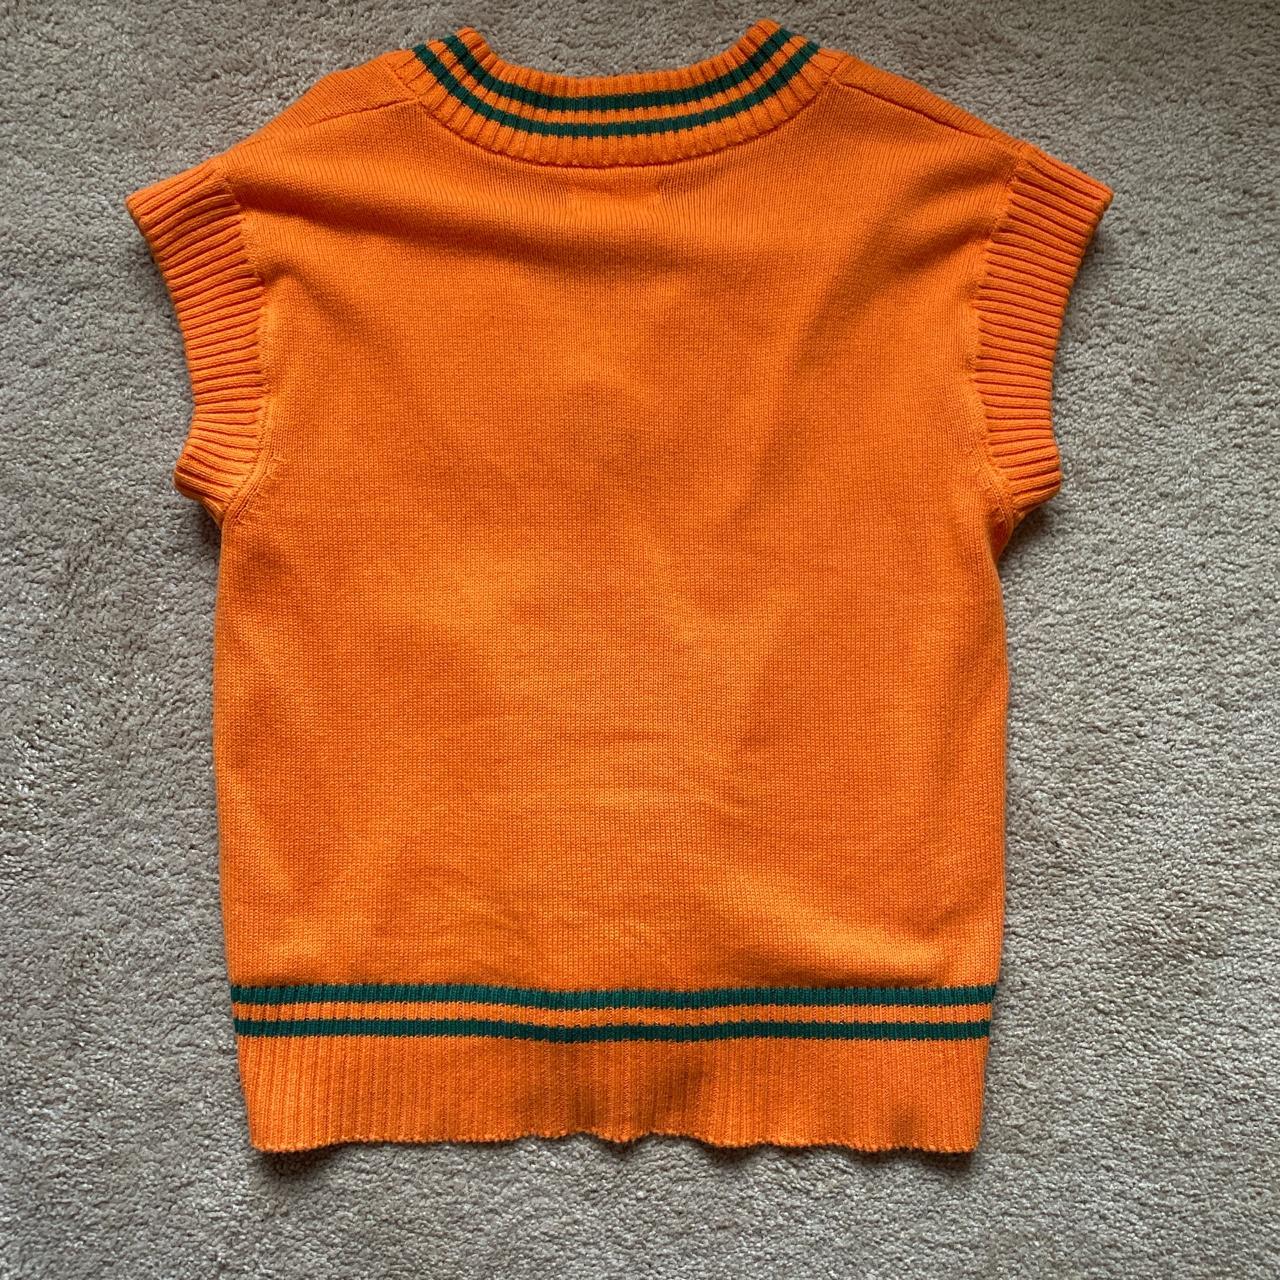 Native Youth Women's Green and Orange Jumper (4)